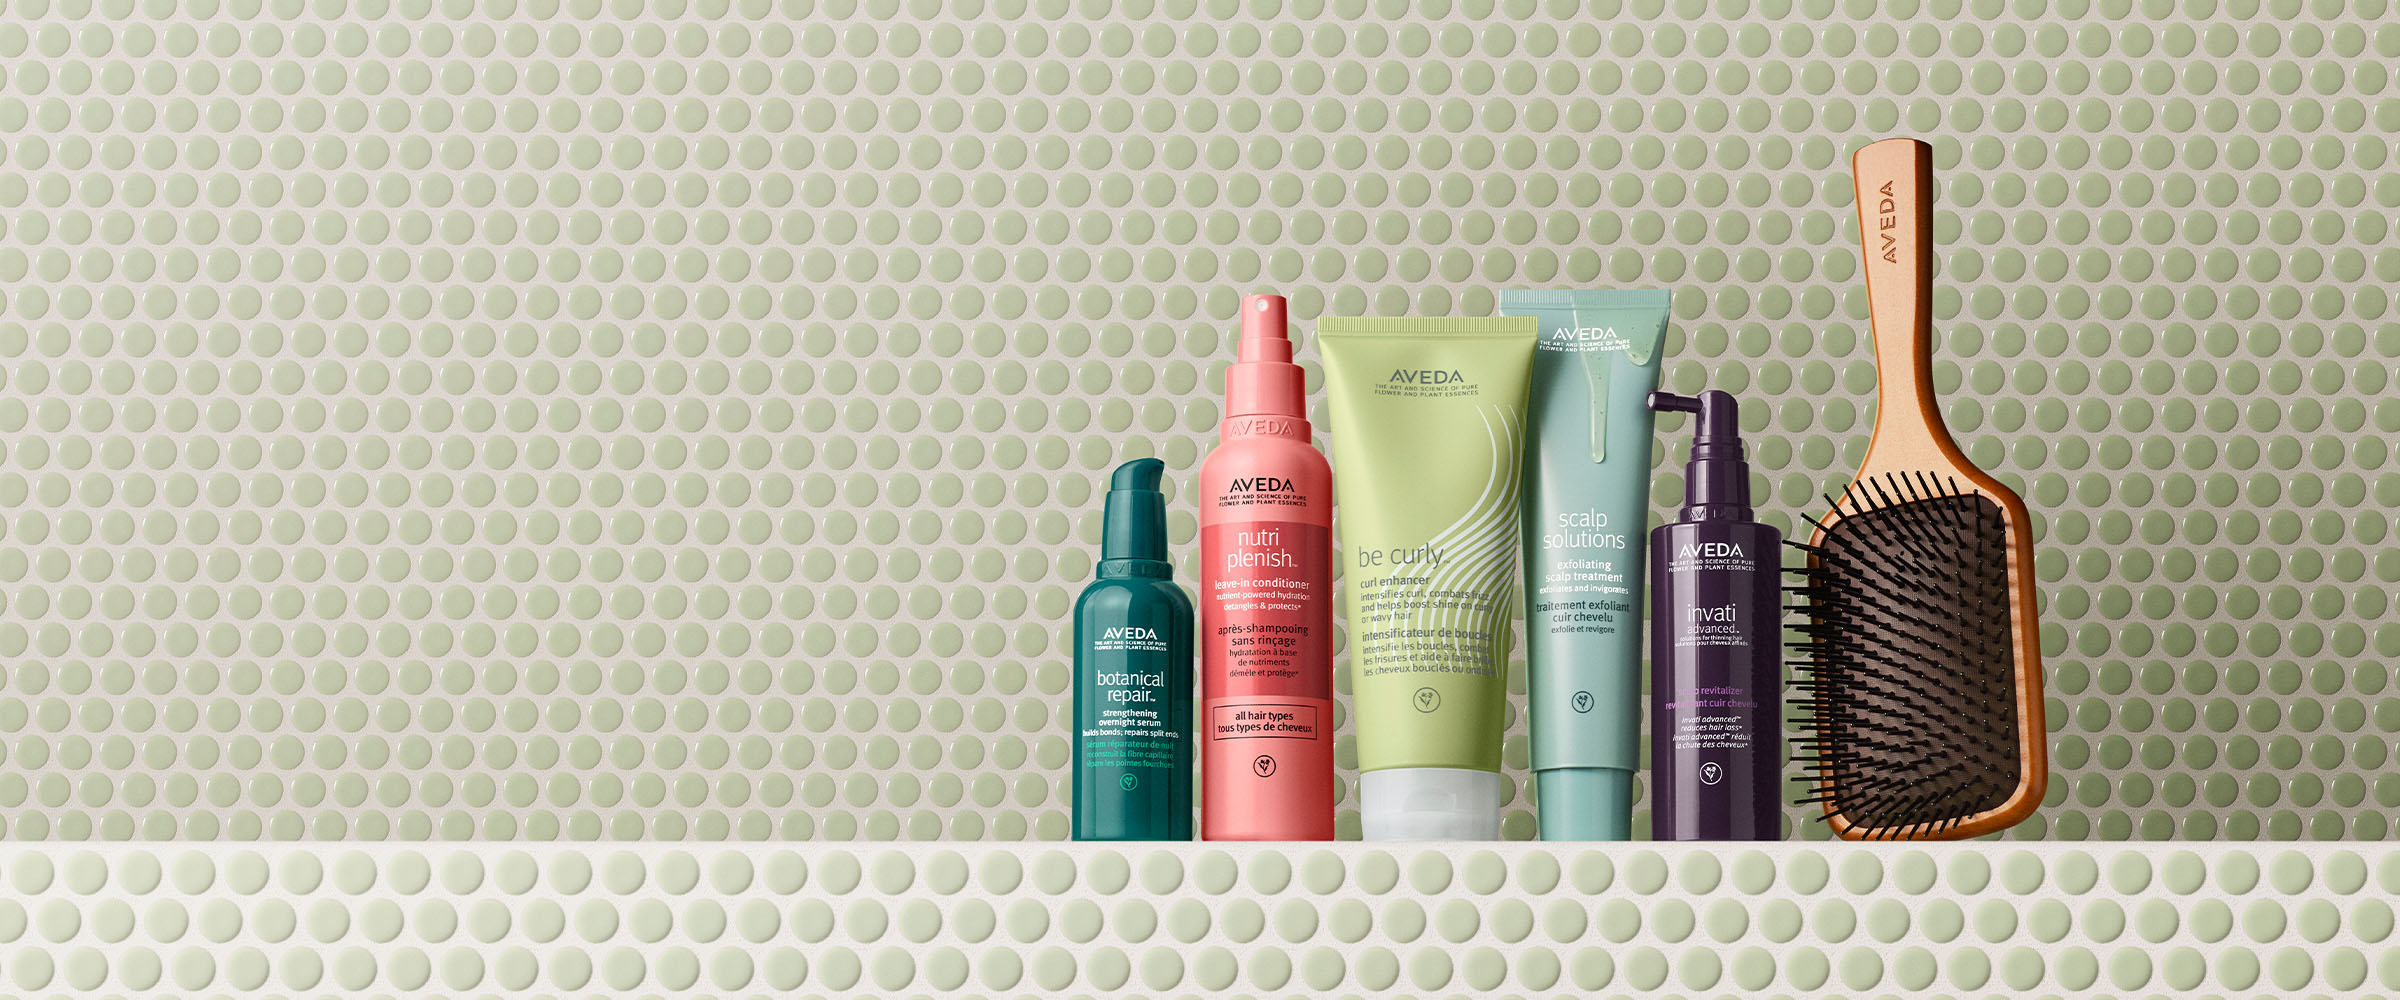 Shop Aveda Favorites with 25% off + free shipping on all orders